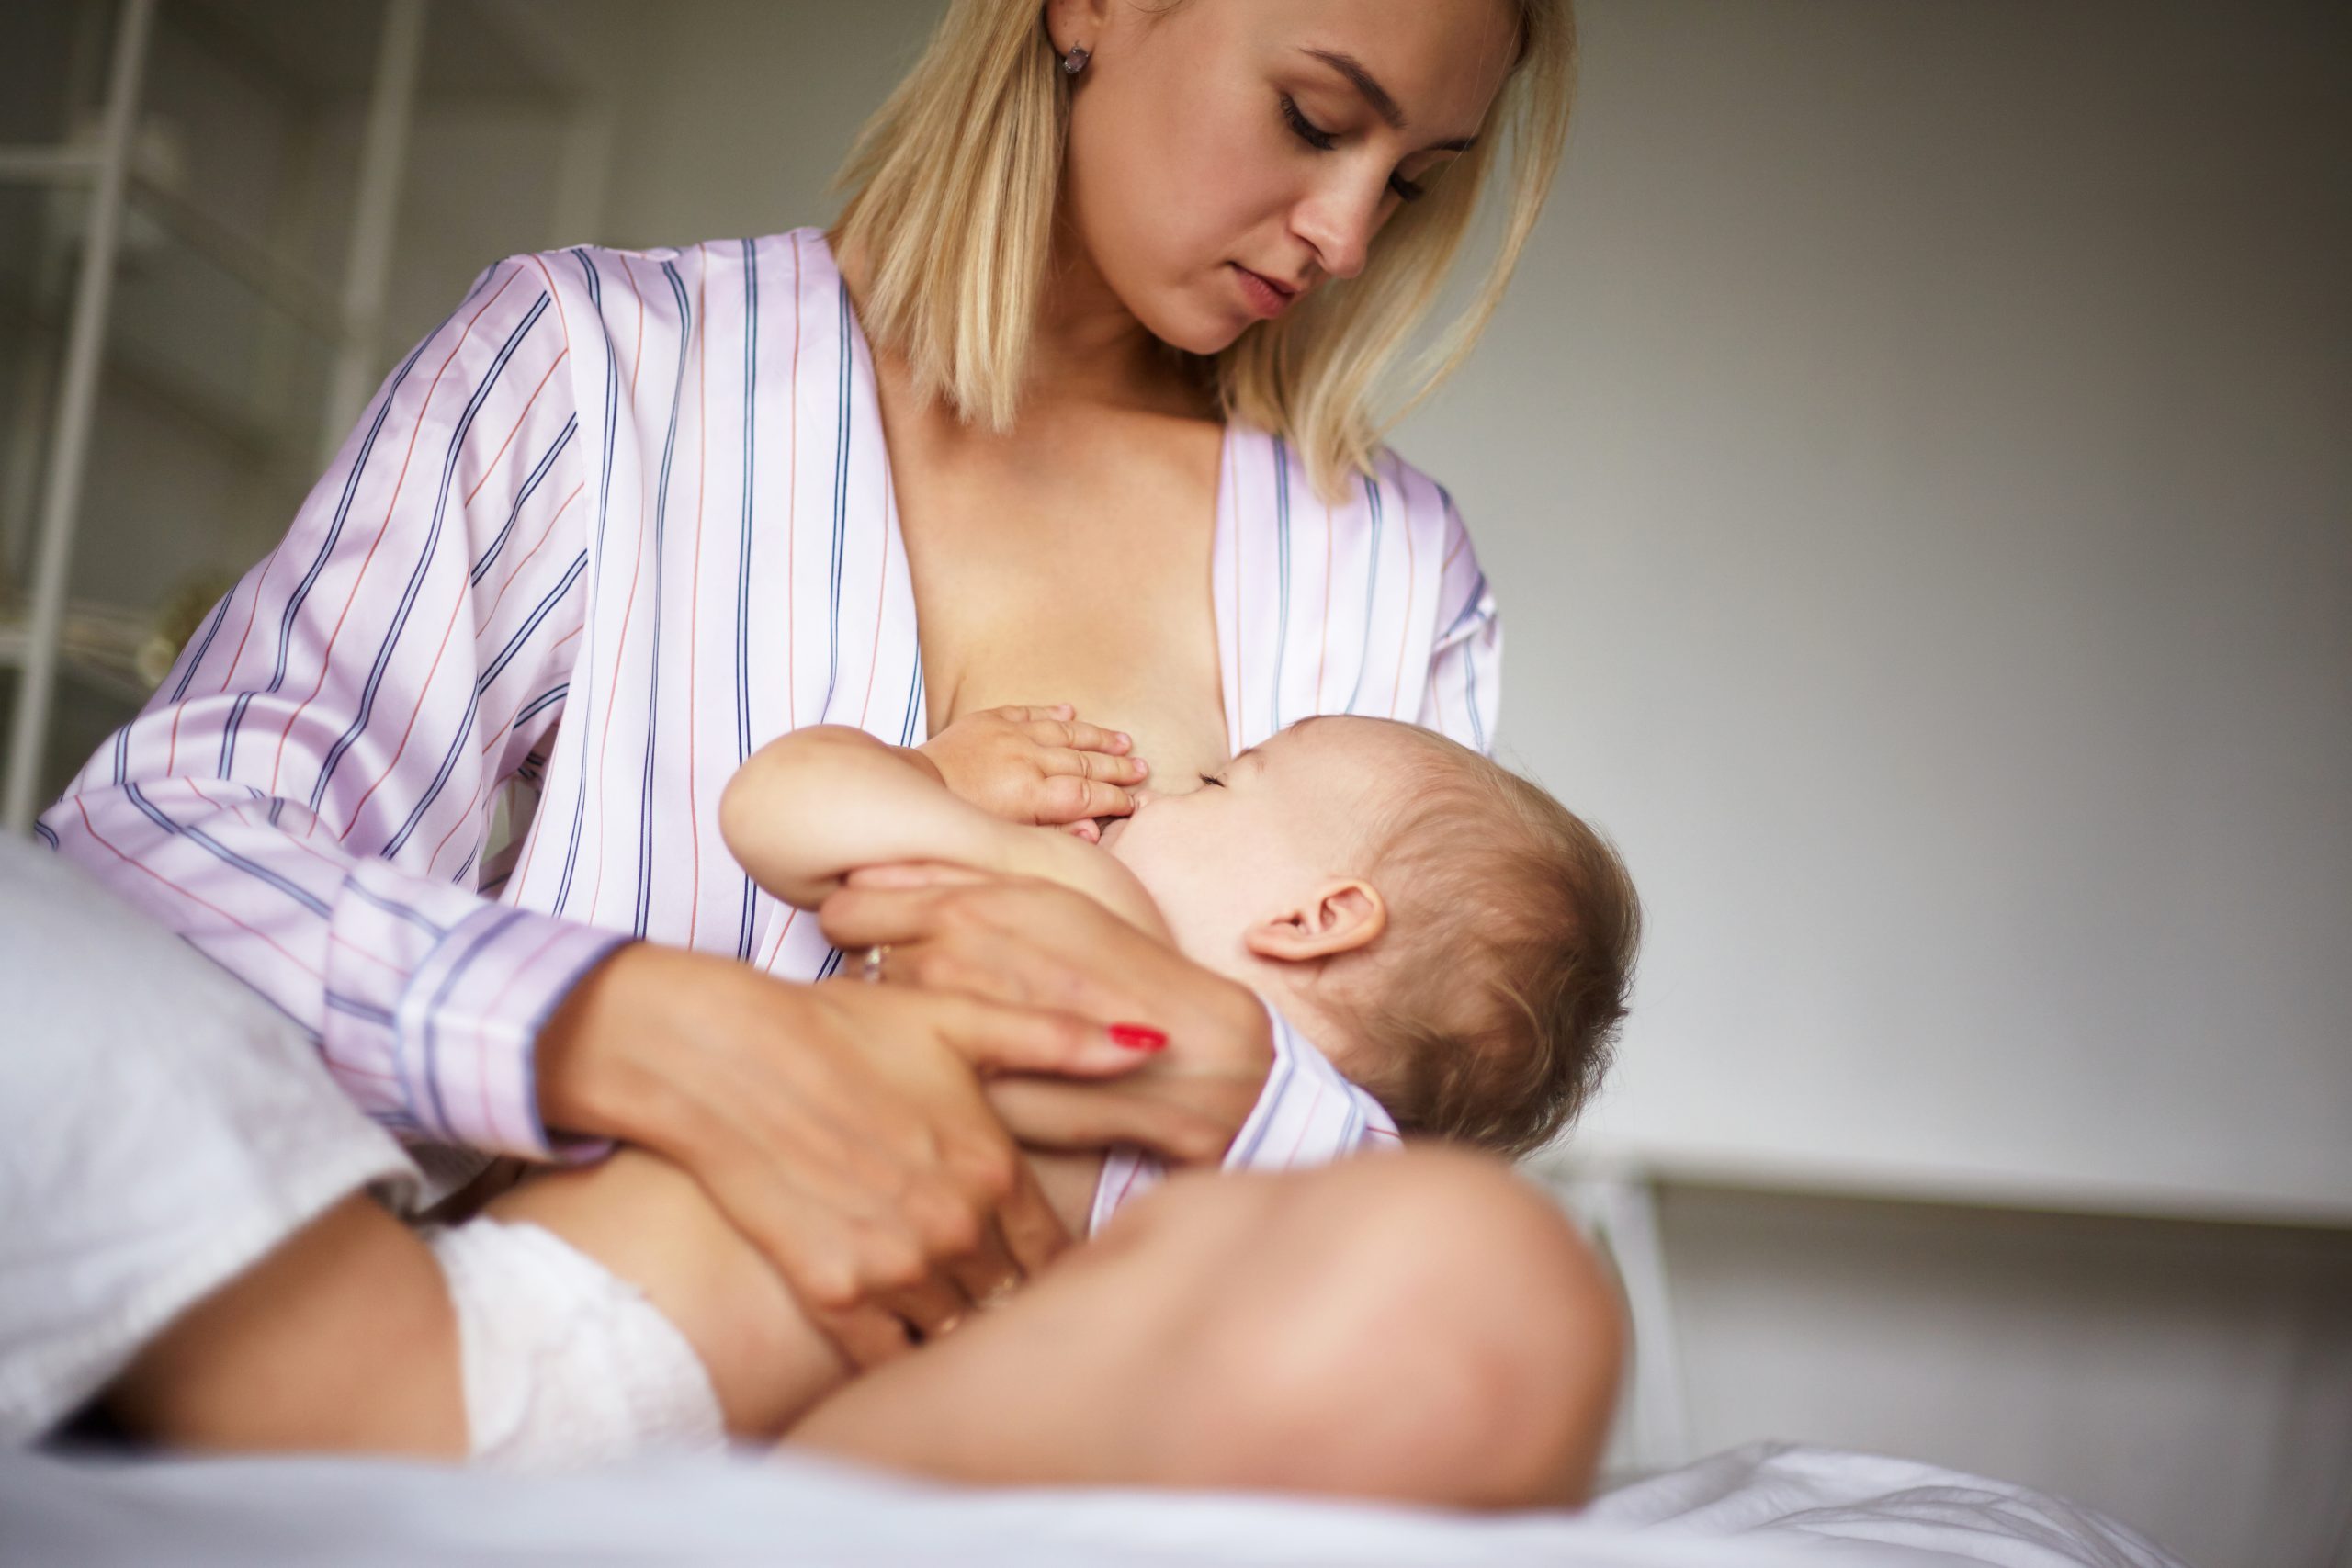 Tender beautiful young female wearing stylish silk pajamas sitting on bed embracing her baby, breastfeeding. Sleepy toddler sucking on mommy's breastmilk in bedroom. Childcare, love and care